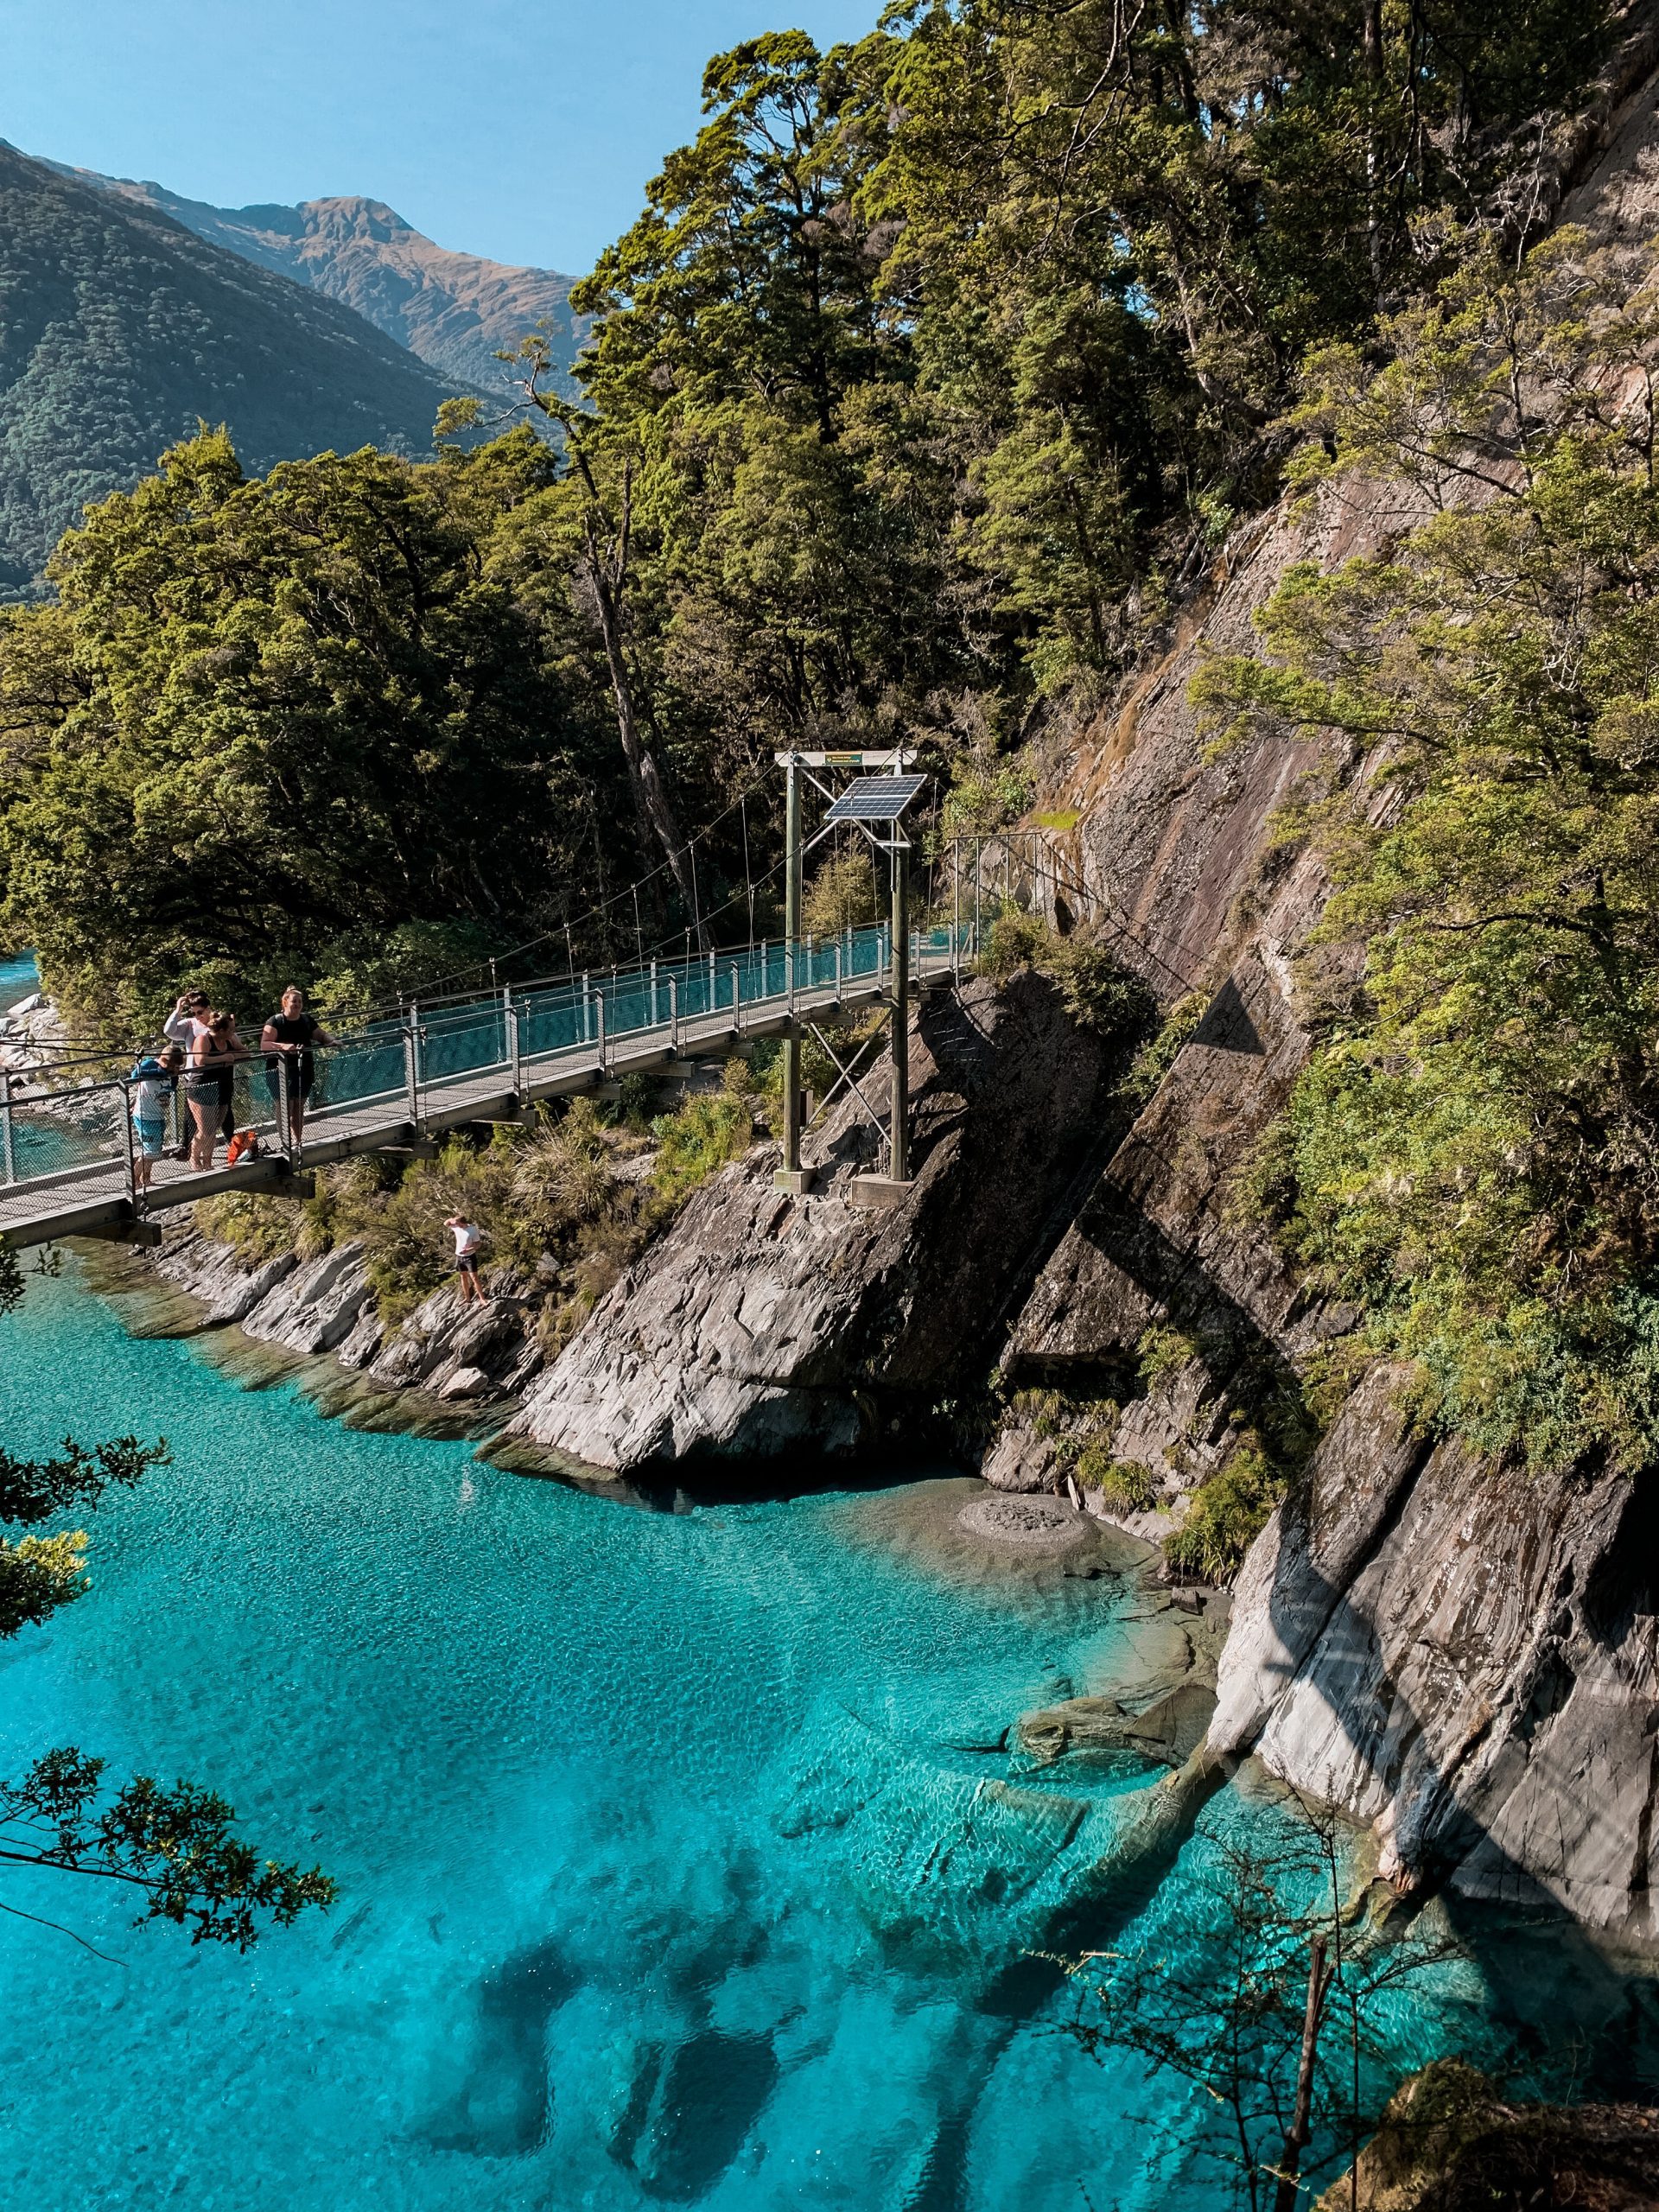 A family with children standing on a swing-bridge above bright turquoise water and cliffs/ trees in the backdrop.